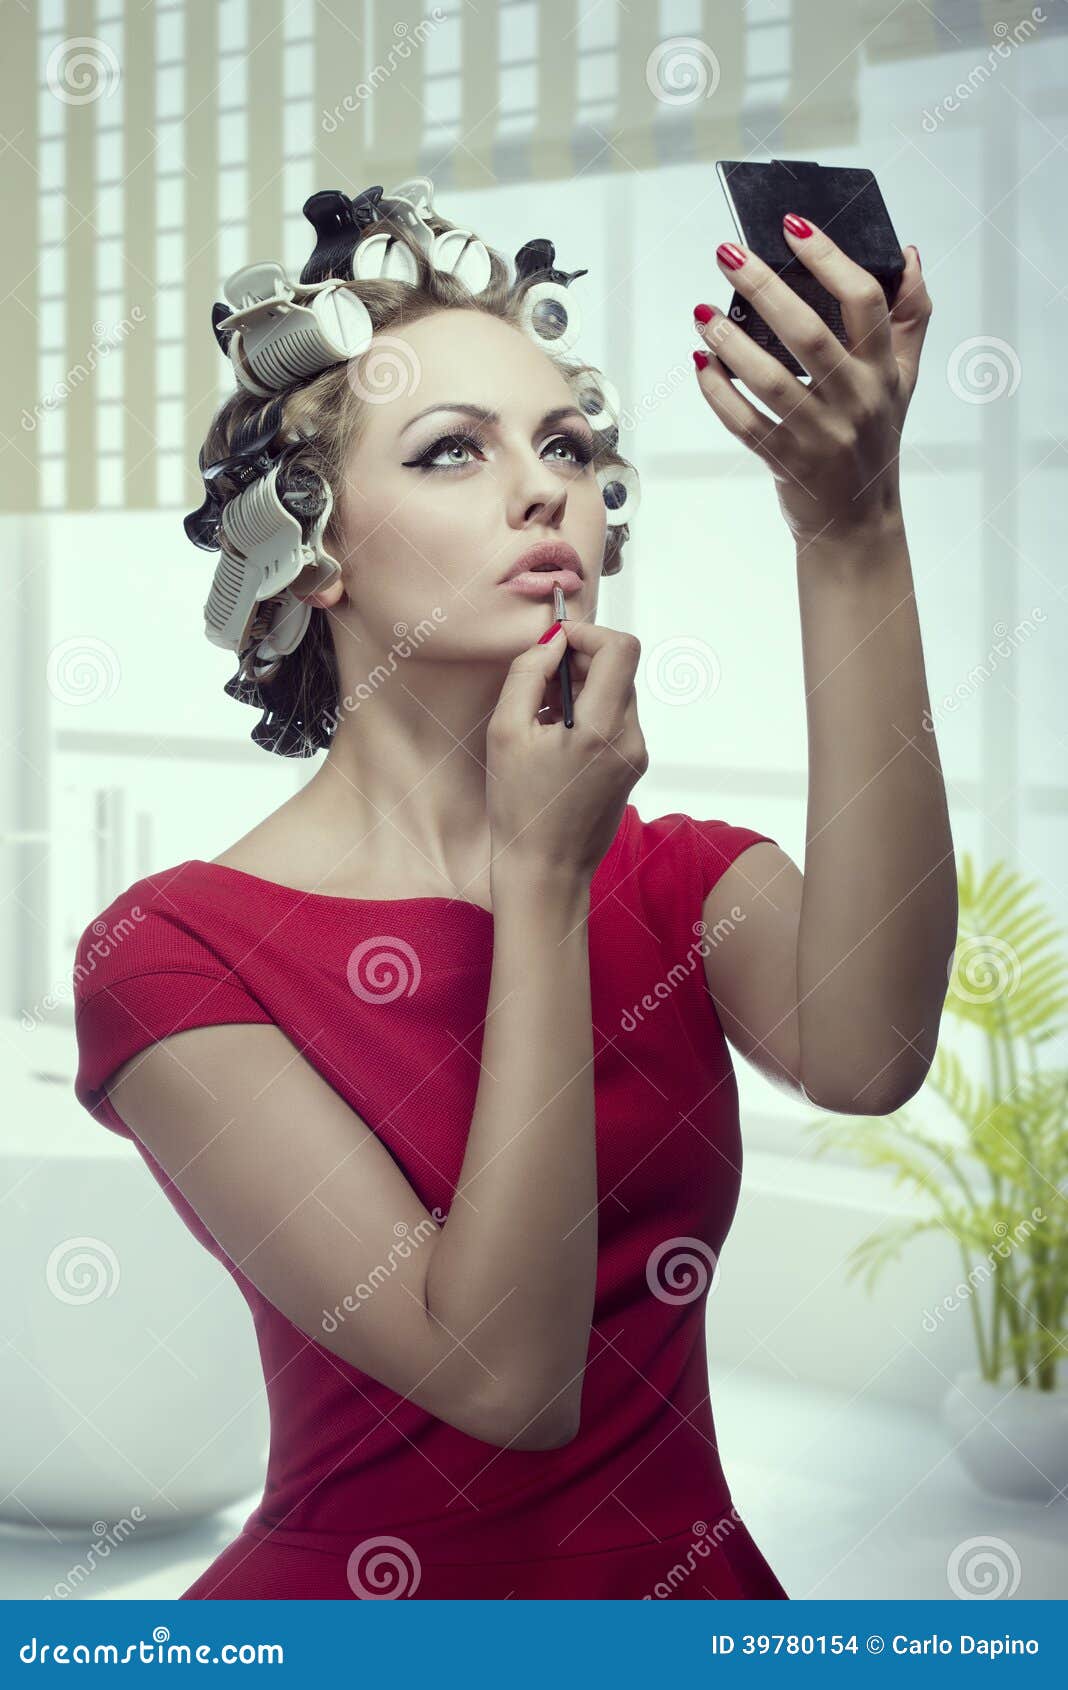 Makeup Girl With Hair Rollers Stock Photo - Image: 39780154